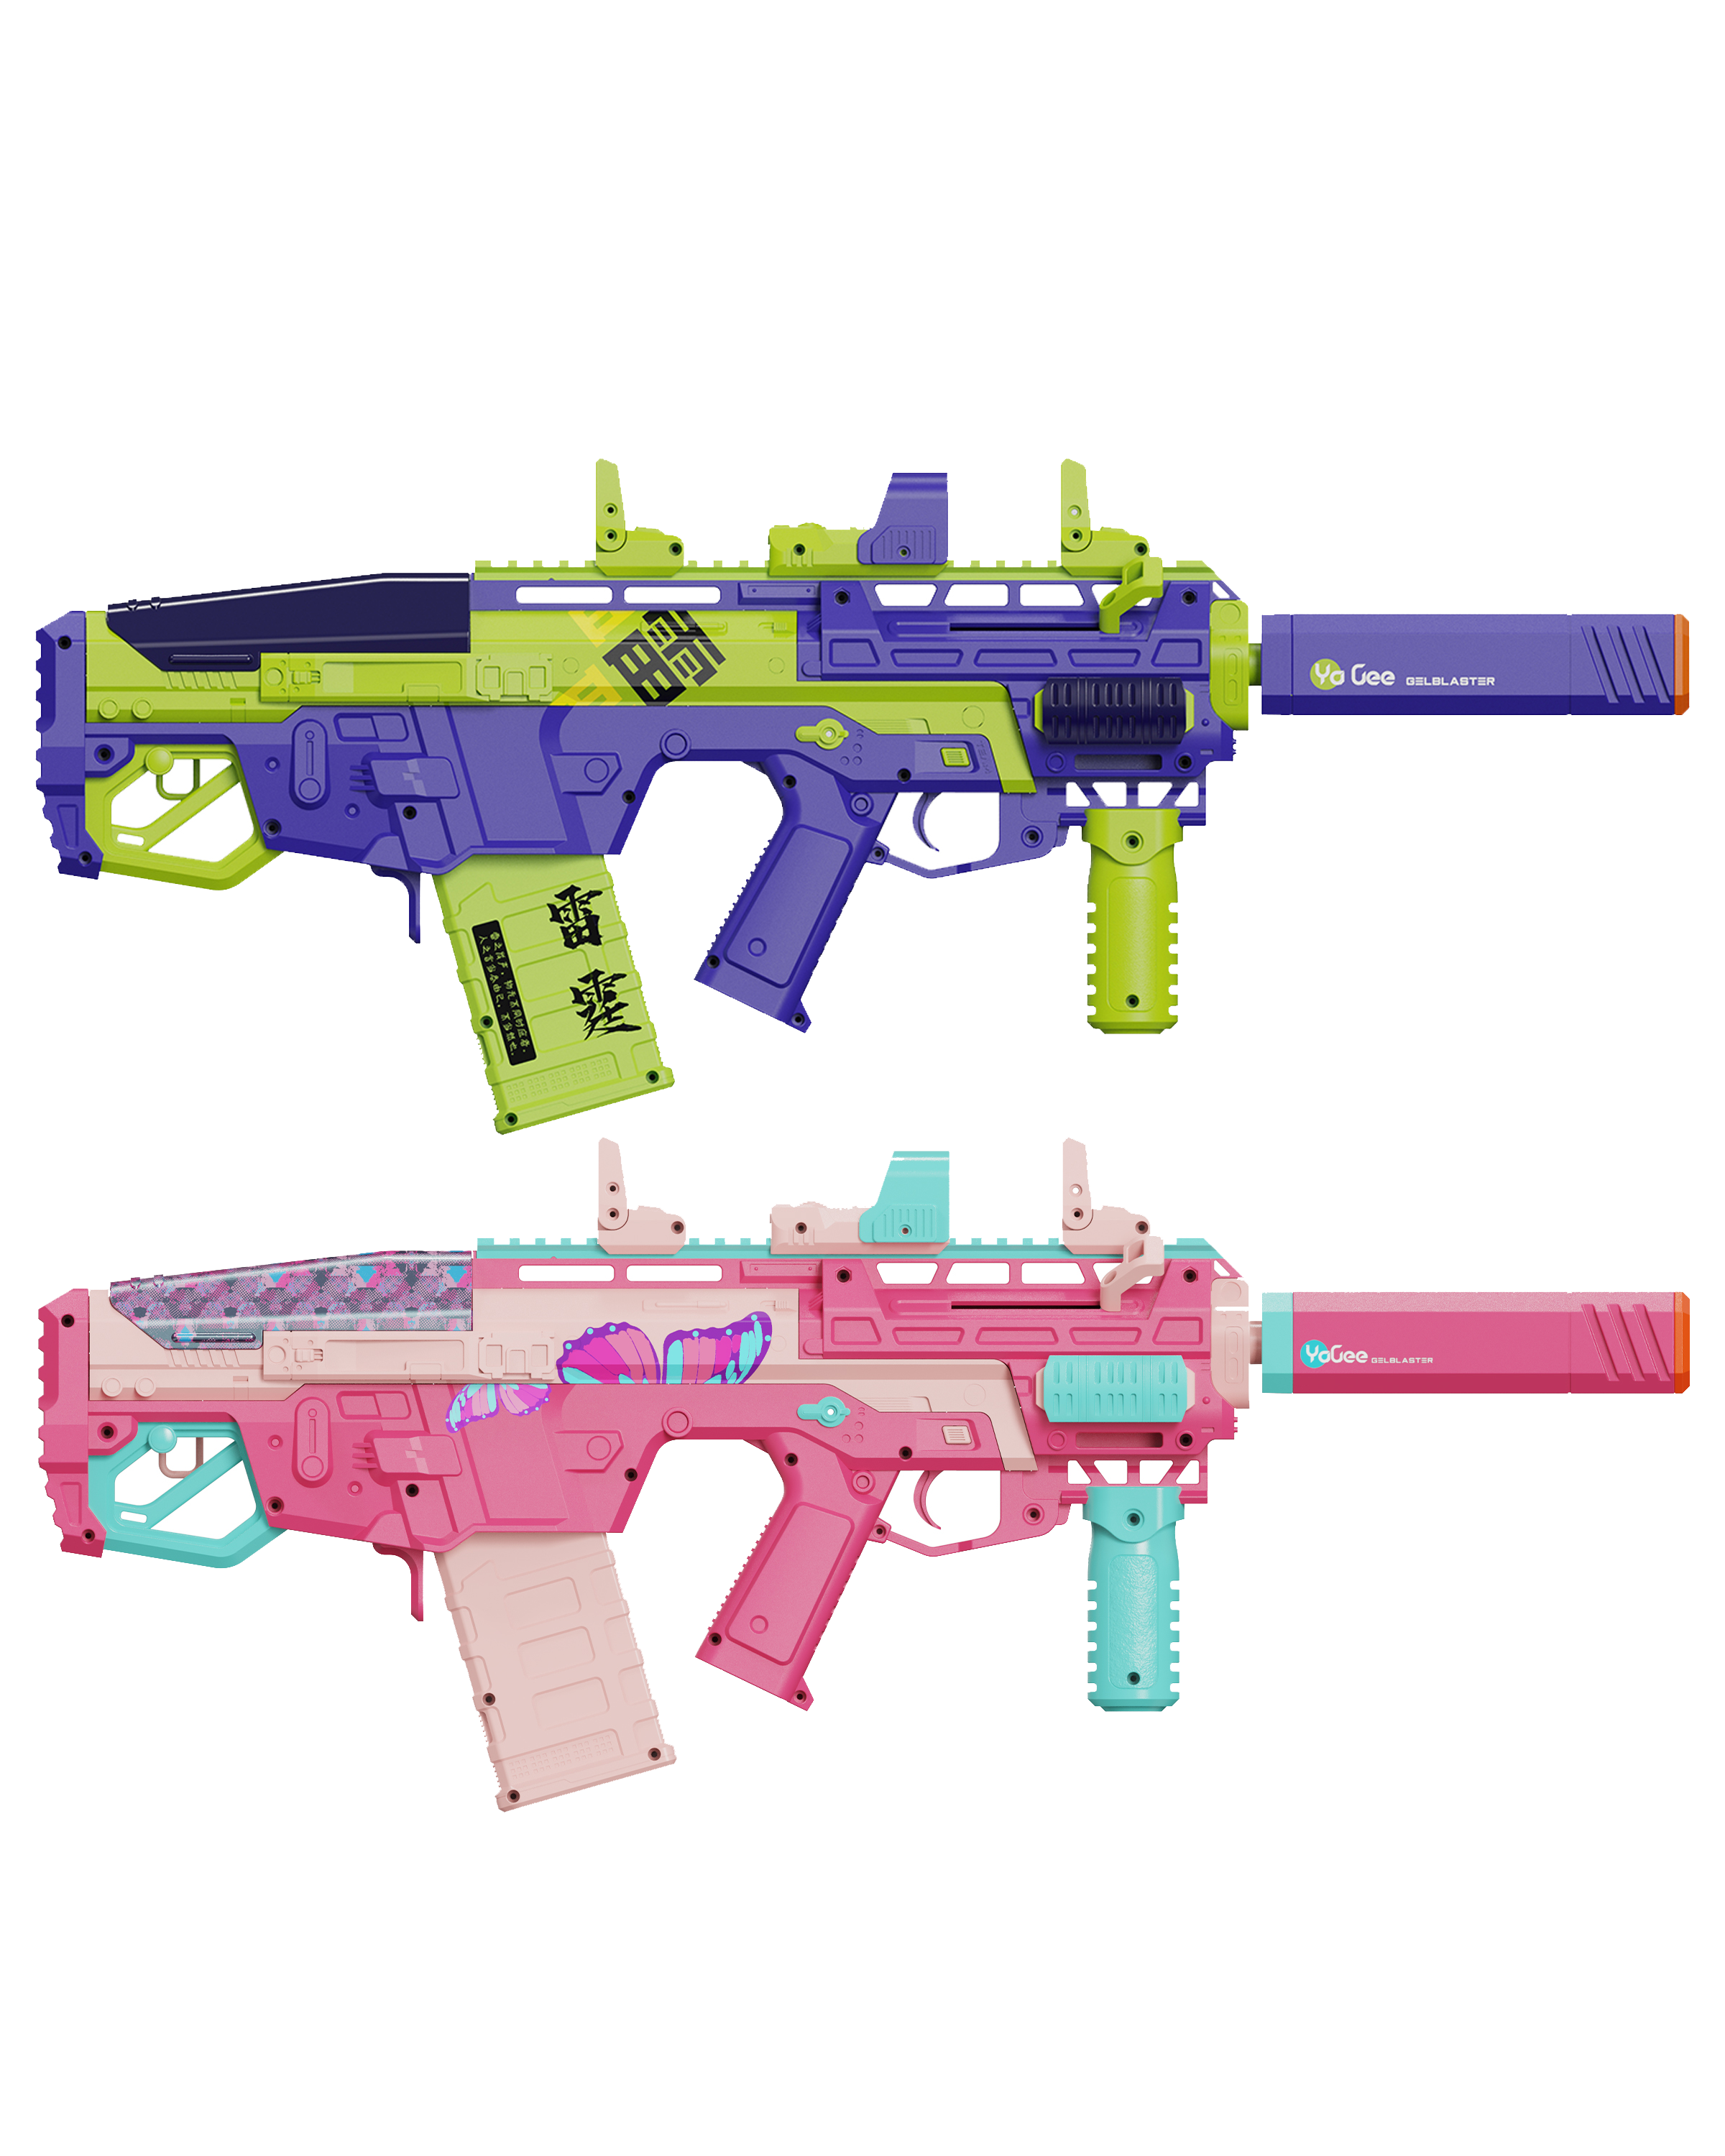 YaGee Gel Blaster Fun Pack: Ready for Action!